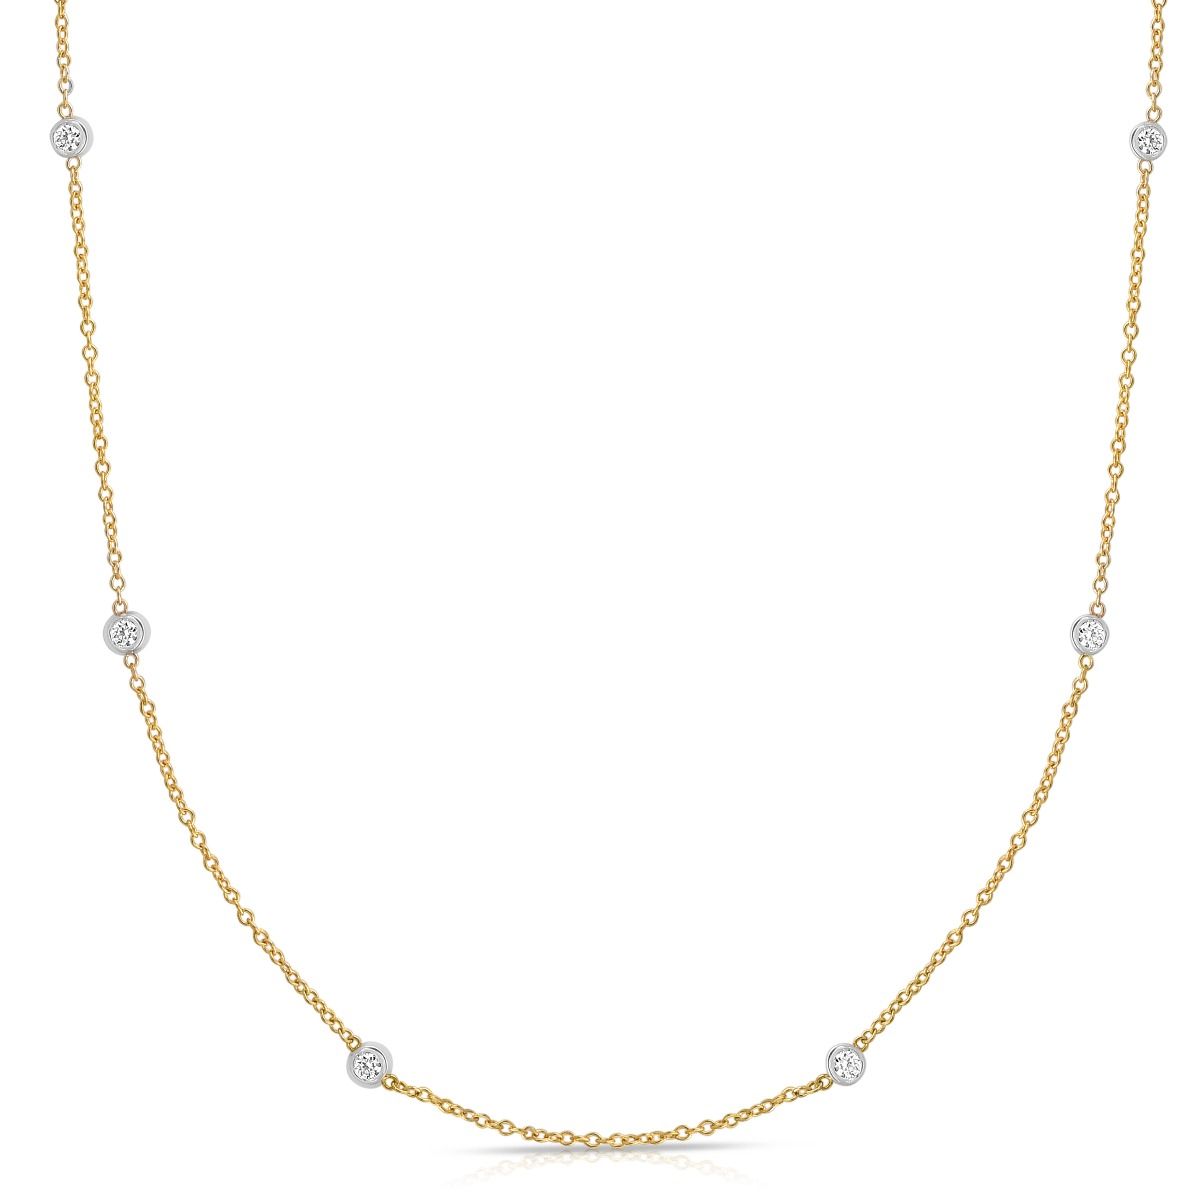 Diamonds by the Yard Necklace - Acadian Estates & CustomPendant and Chain